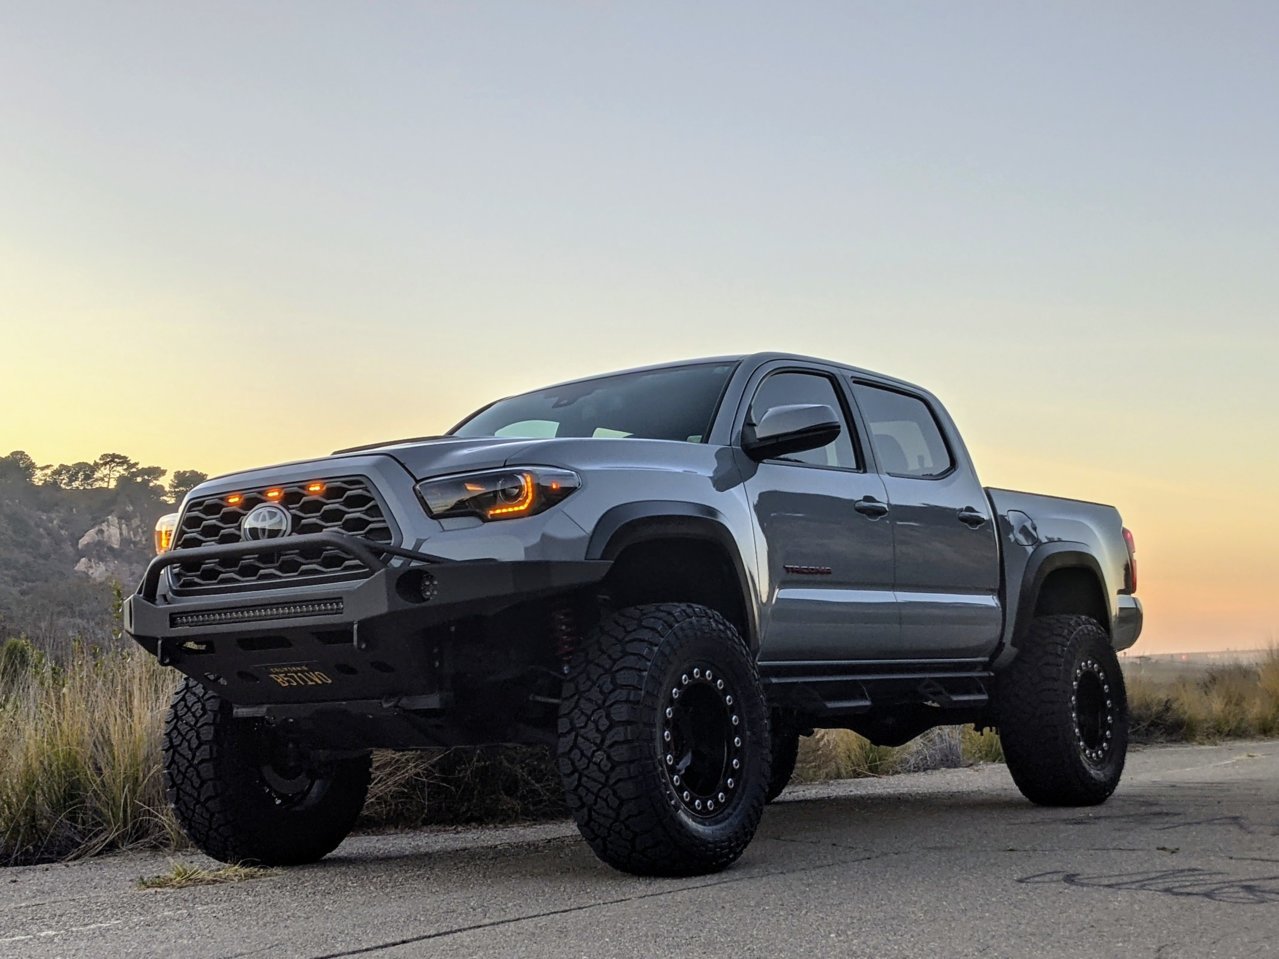 2018 Dcsb Trd Or Rwd Build Cement Mixer Tacoma World